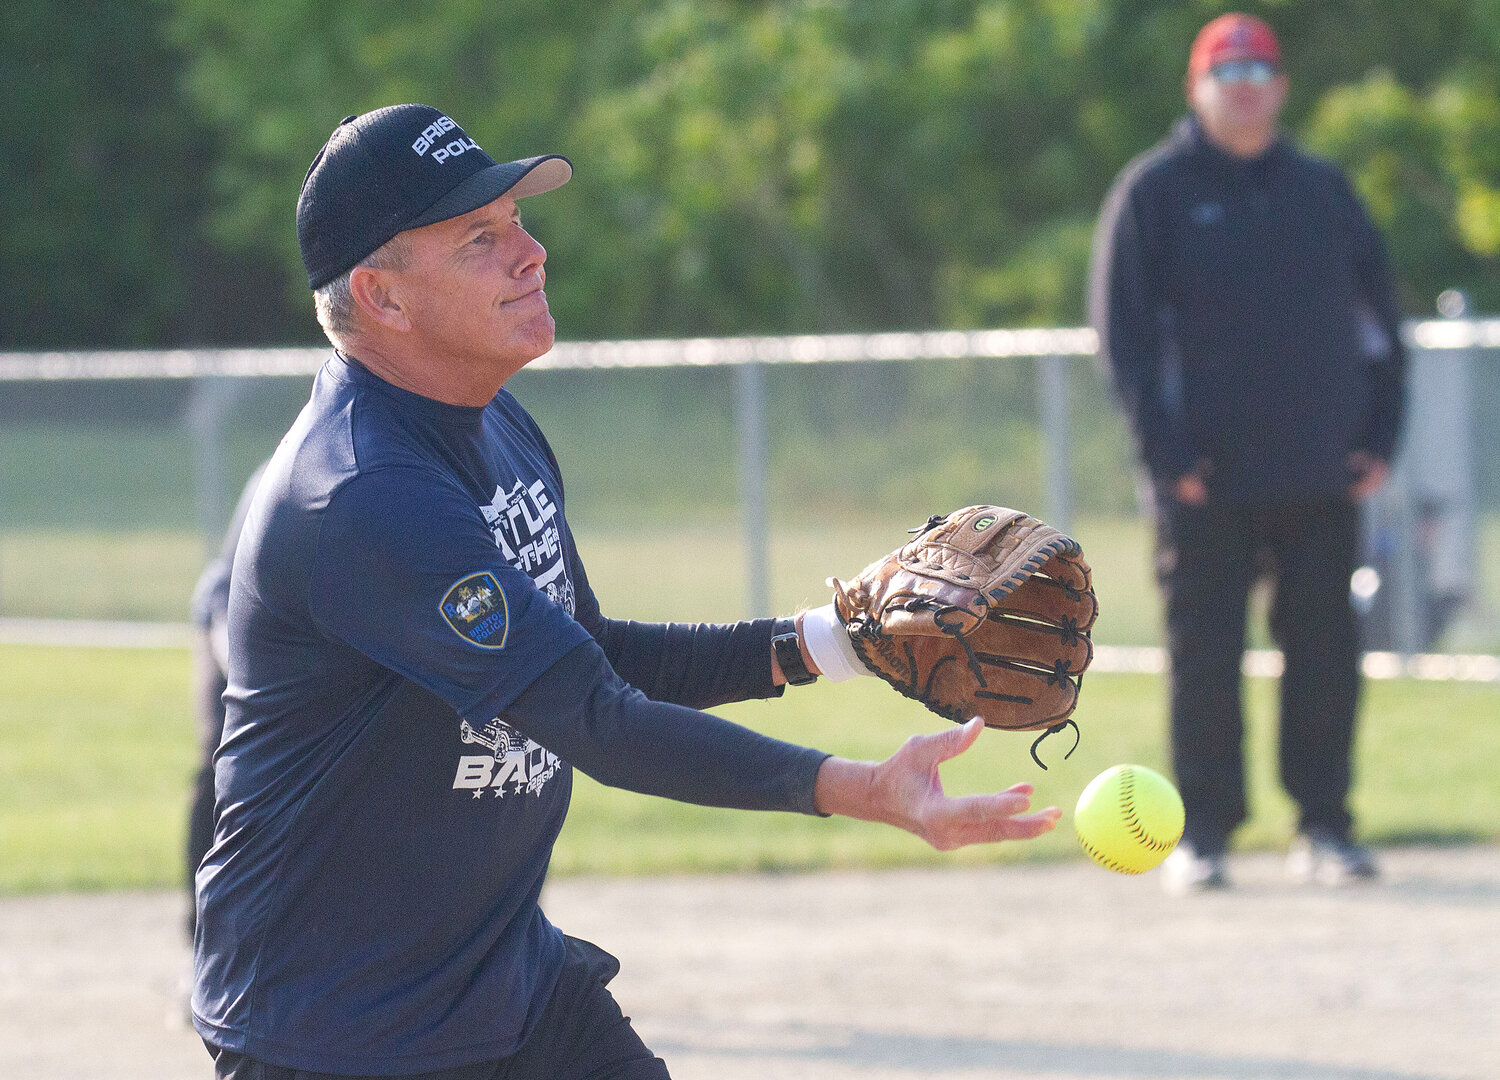 Chief Kevin Lynch tosses a pitch during the game.